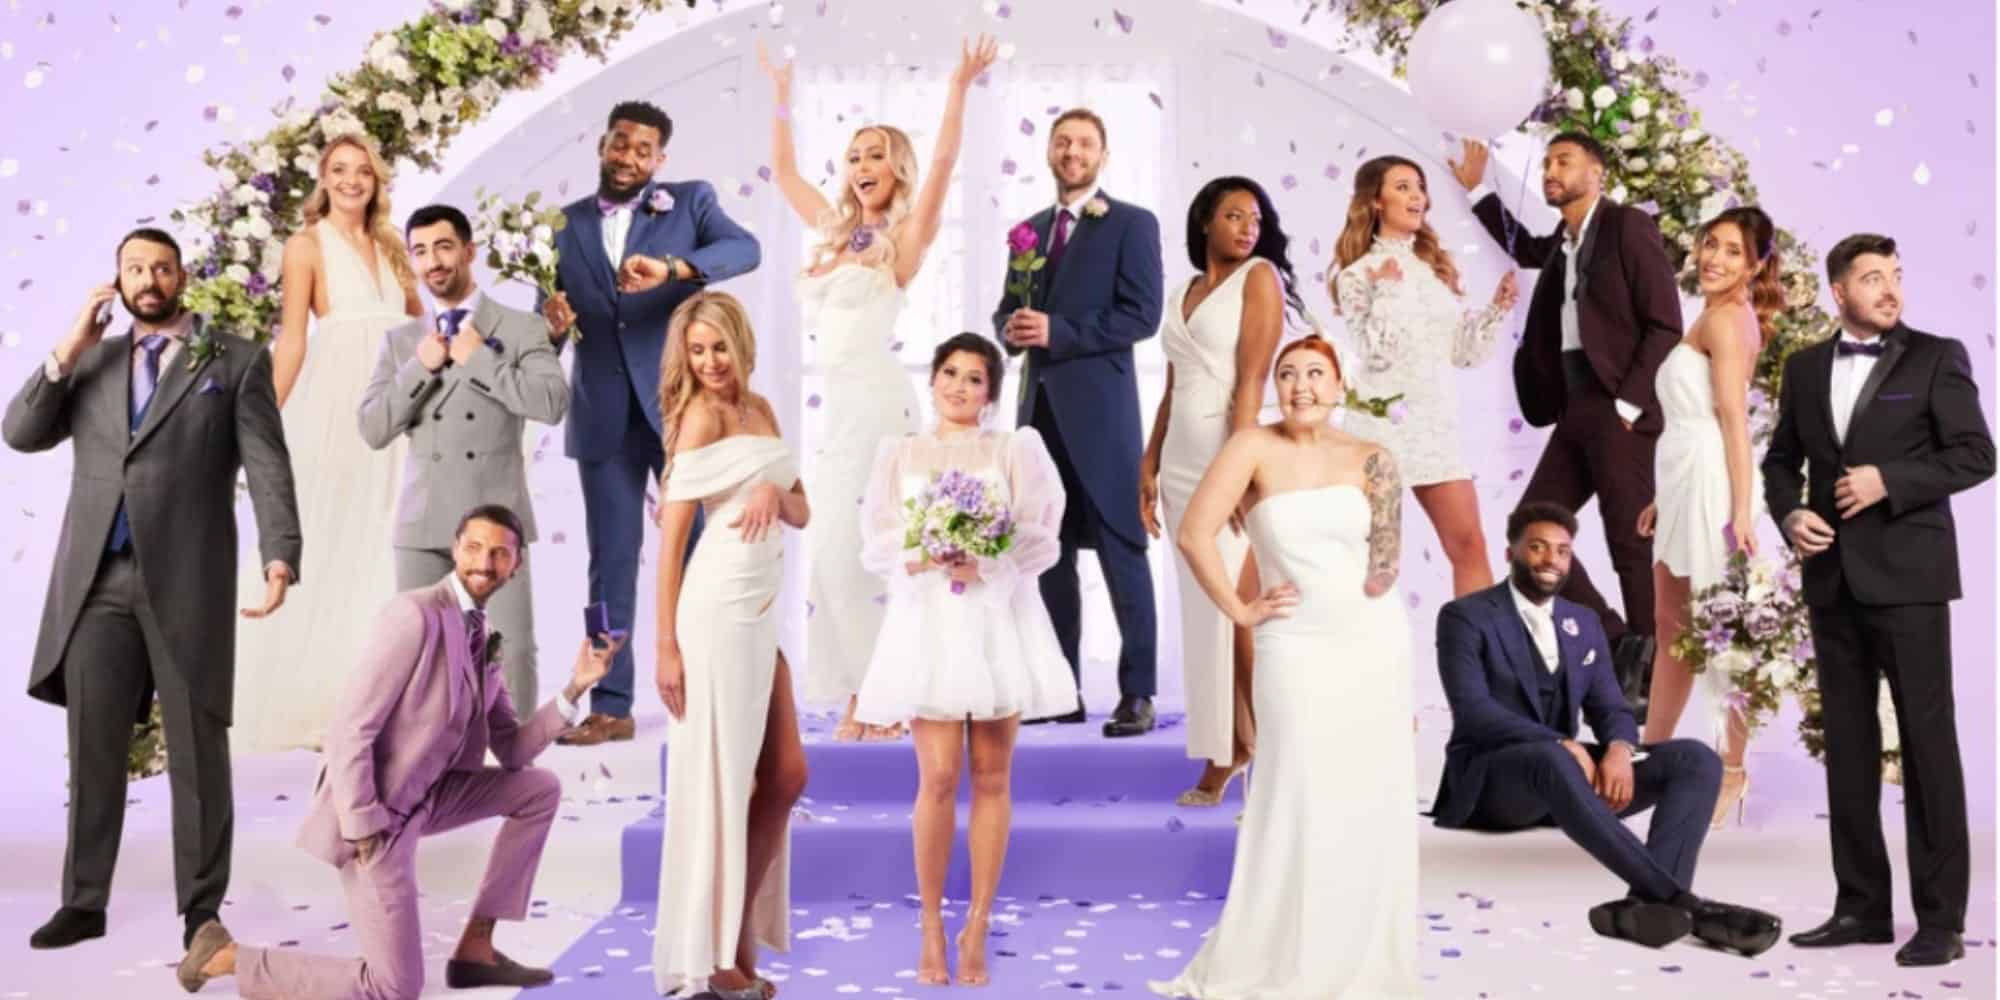 Married At First Sight UK Season 8 Episode 3: Release Date, Spoilers & Where To Watch